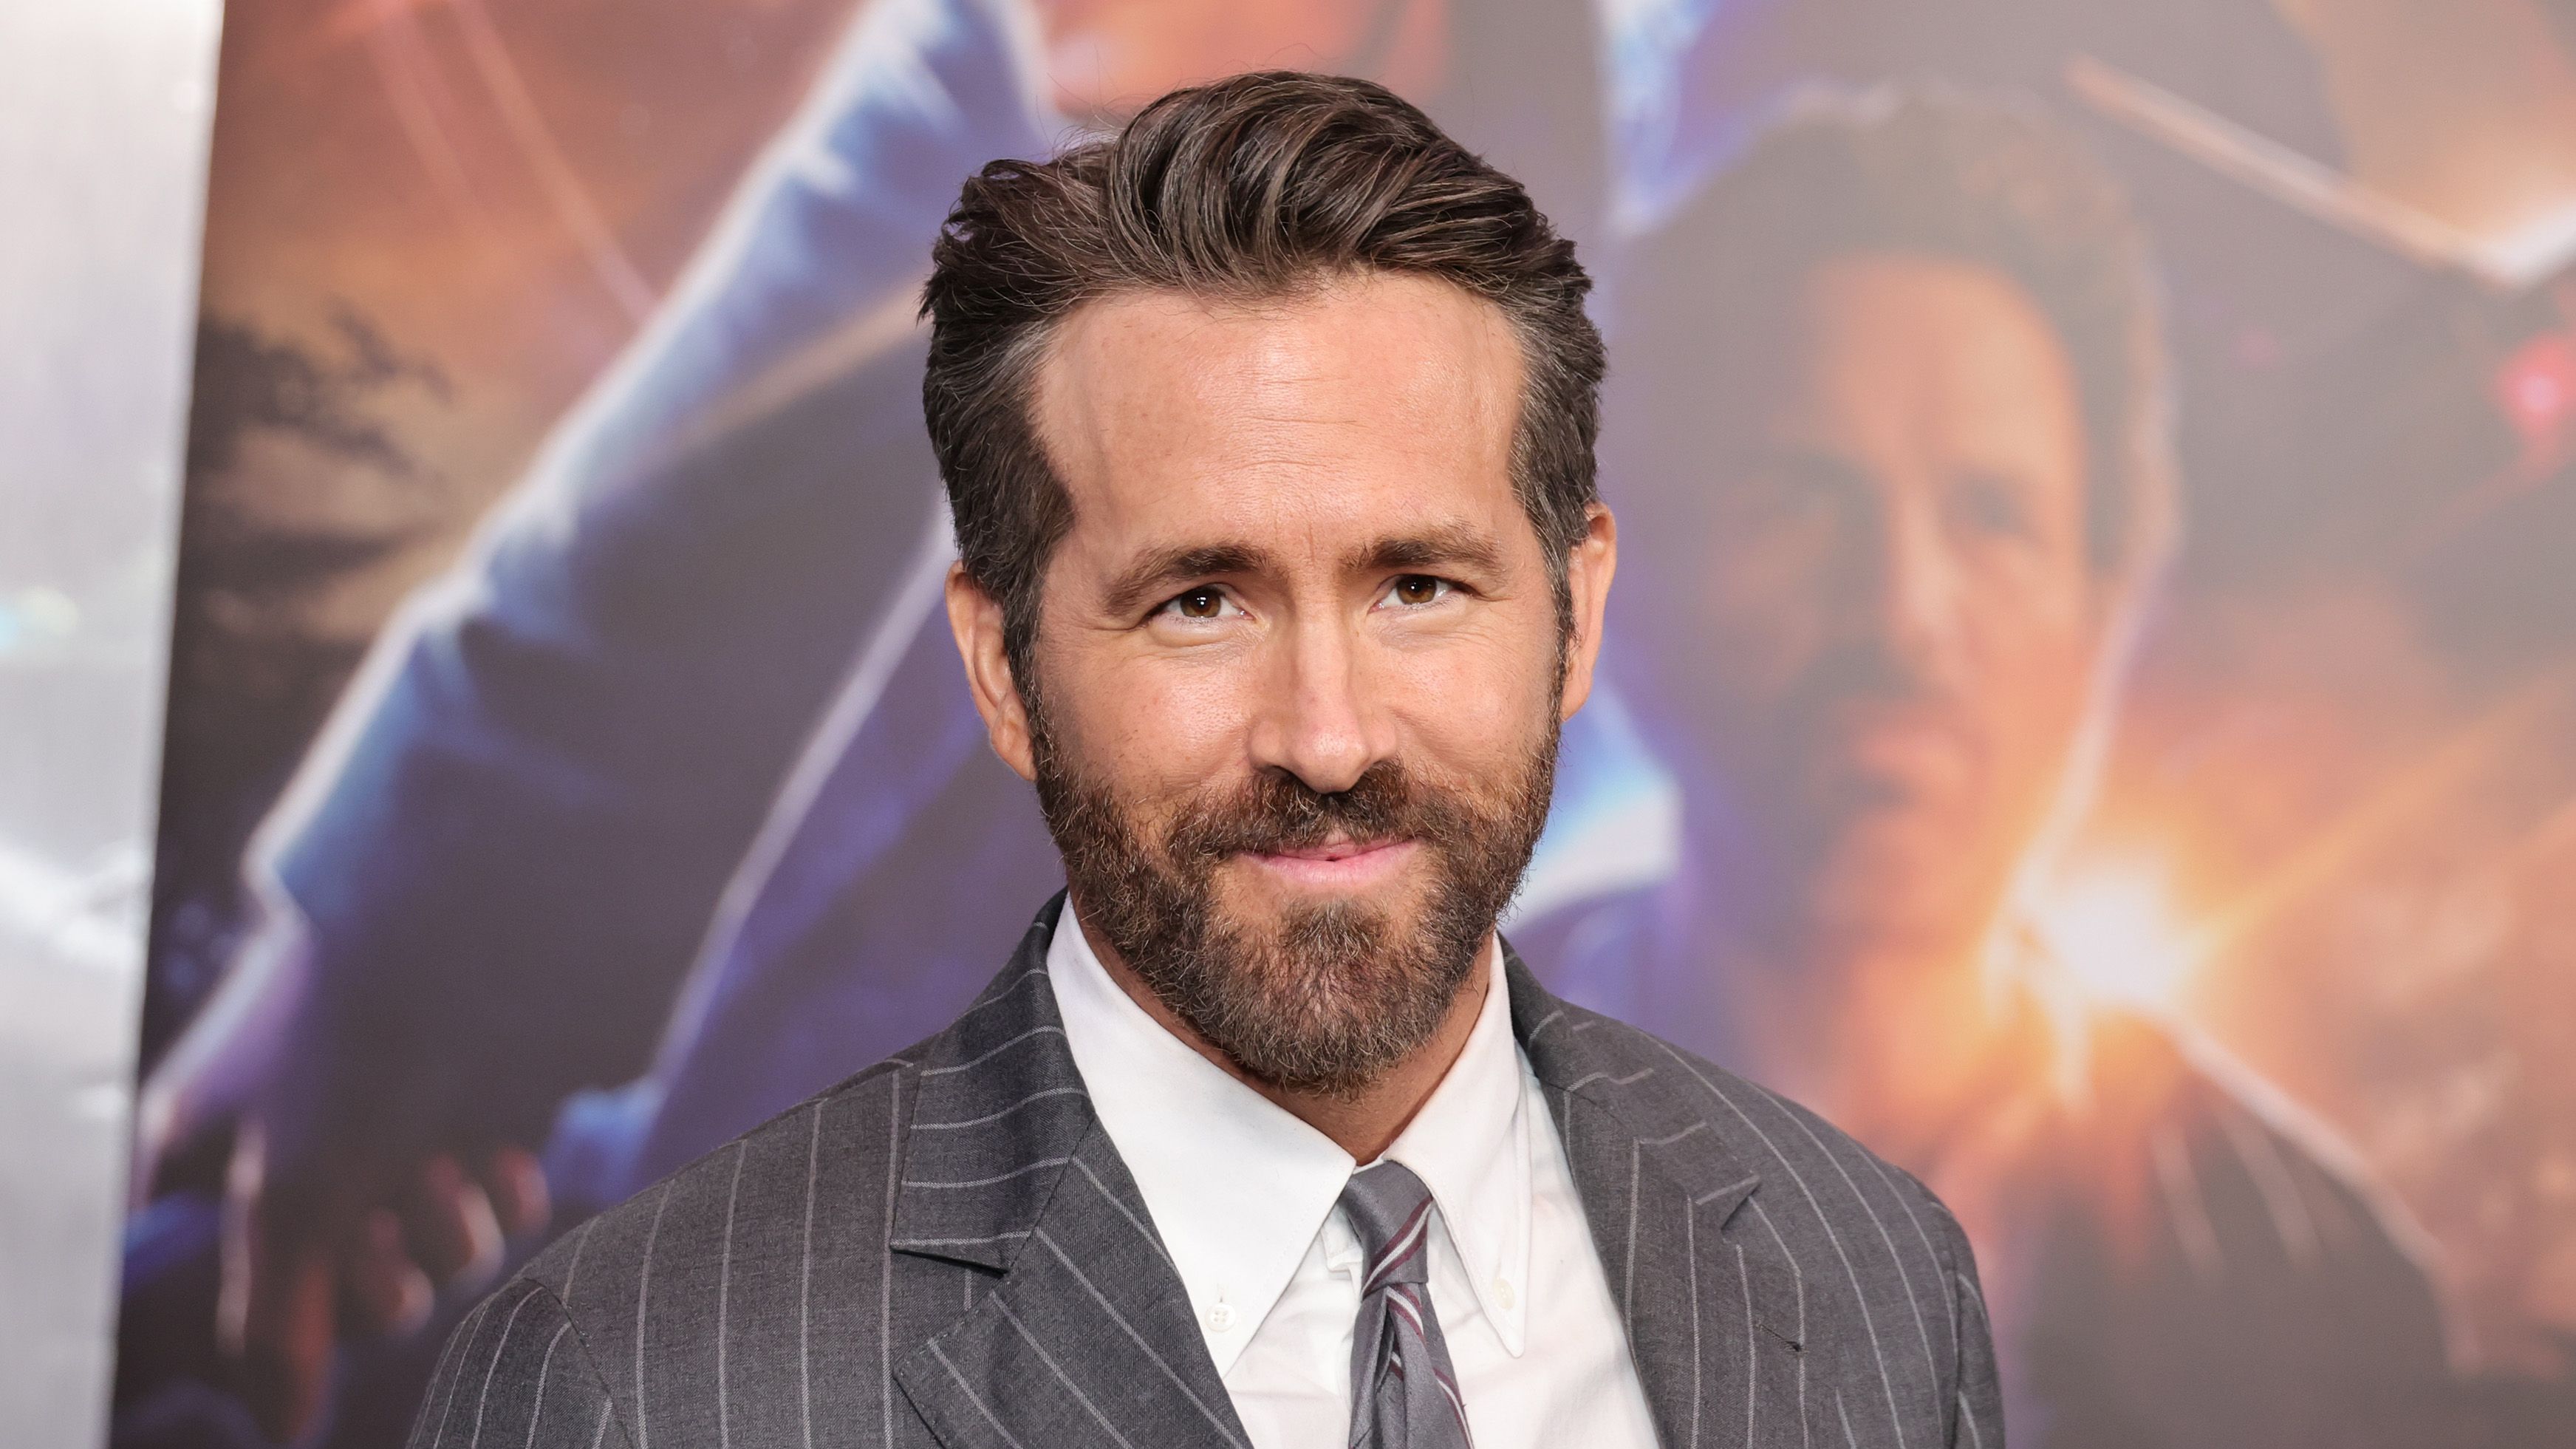 https://hips.hearstapps.com/hmg-prod/images/ryan-reynolds-attends-the-adam-project-new-york-premiere-on-news-photo-1670859001.jpg?crop=1xw:0.84363xh;center,top